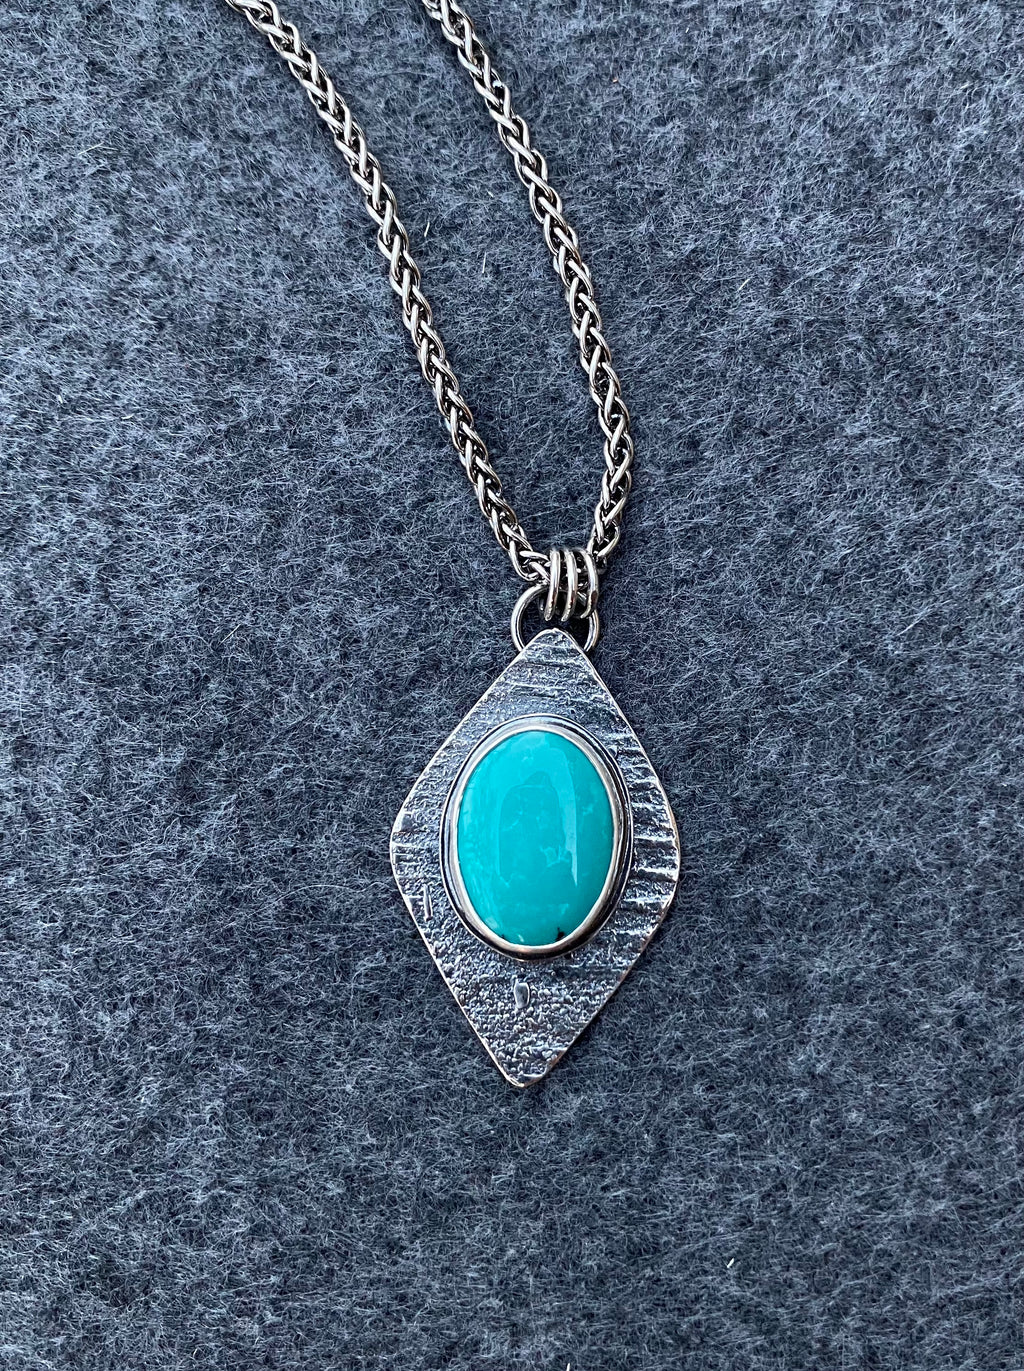 Stardust Pendant Necklace with Turquoise and Sterling Silver #1